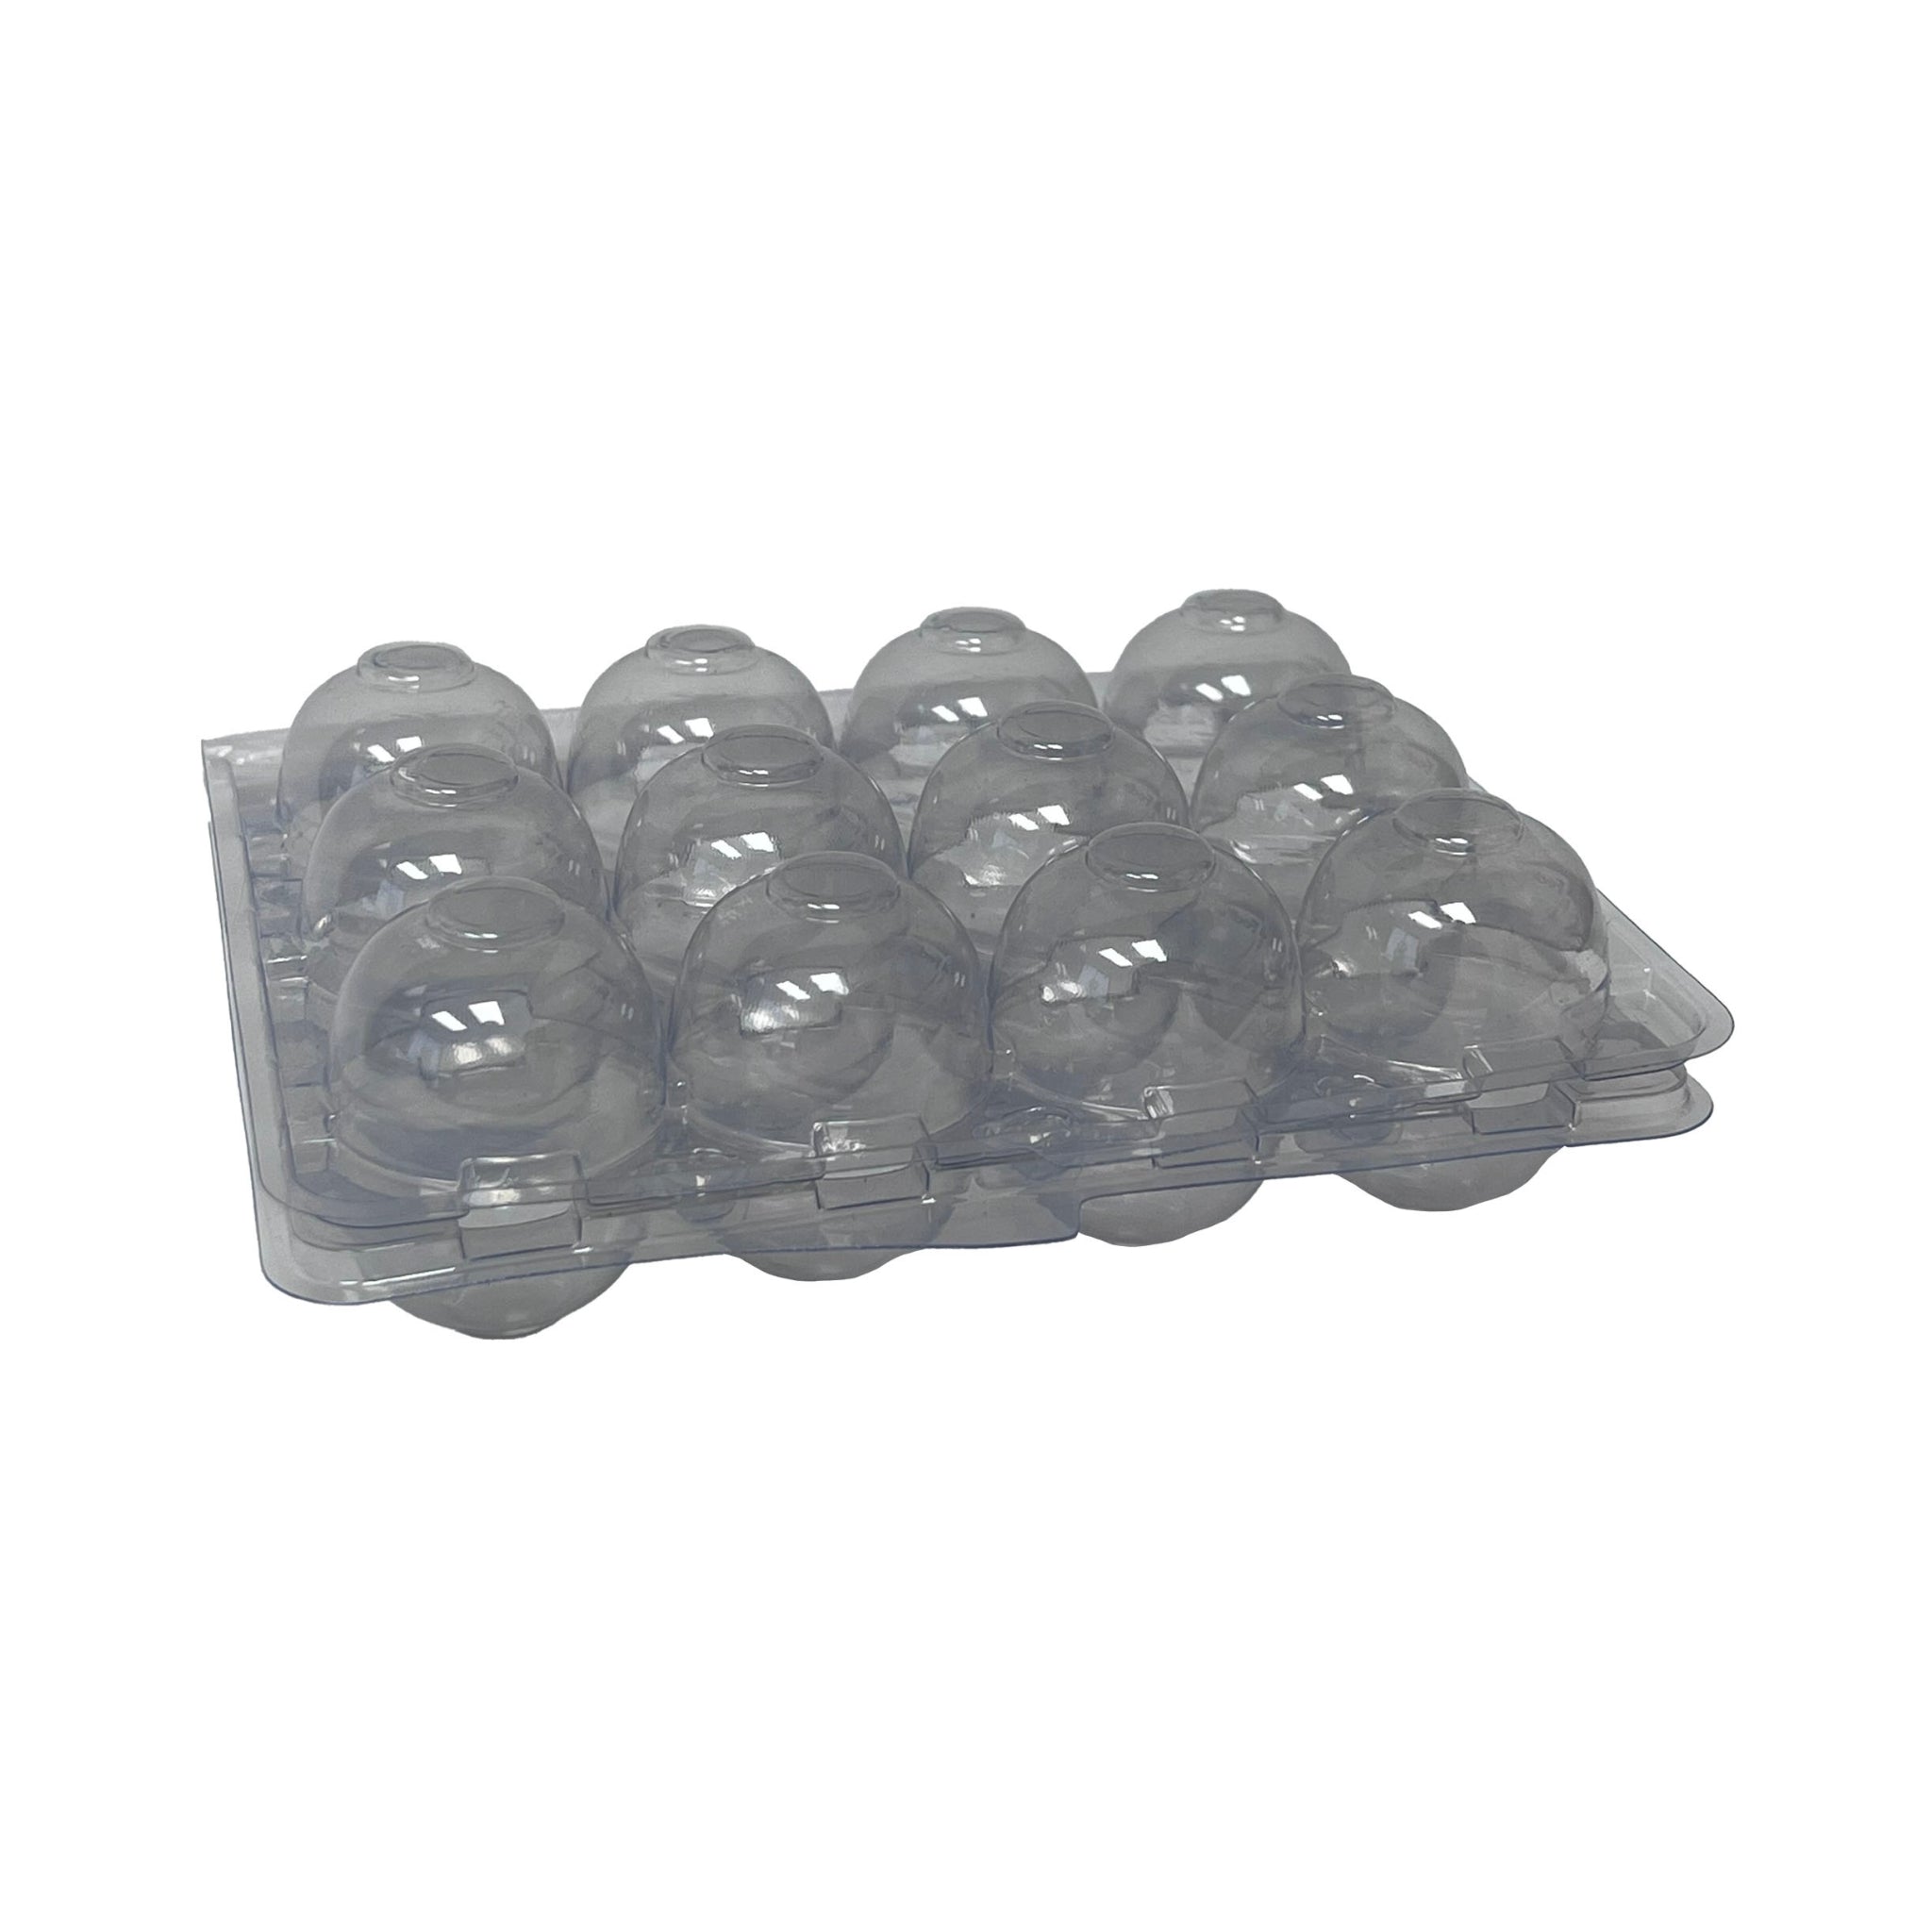 Hatching Time Quail Egg 12 count carton. Closed front view of Egg carton own with the lid open showinis shg 12 spaces for quail eggs.